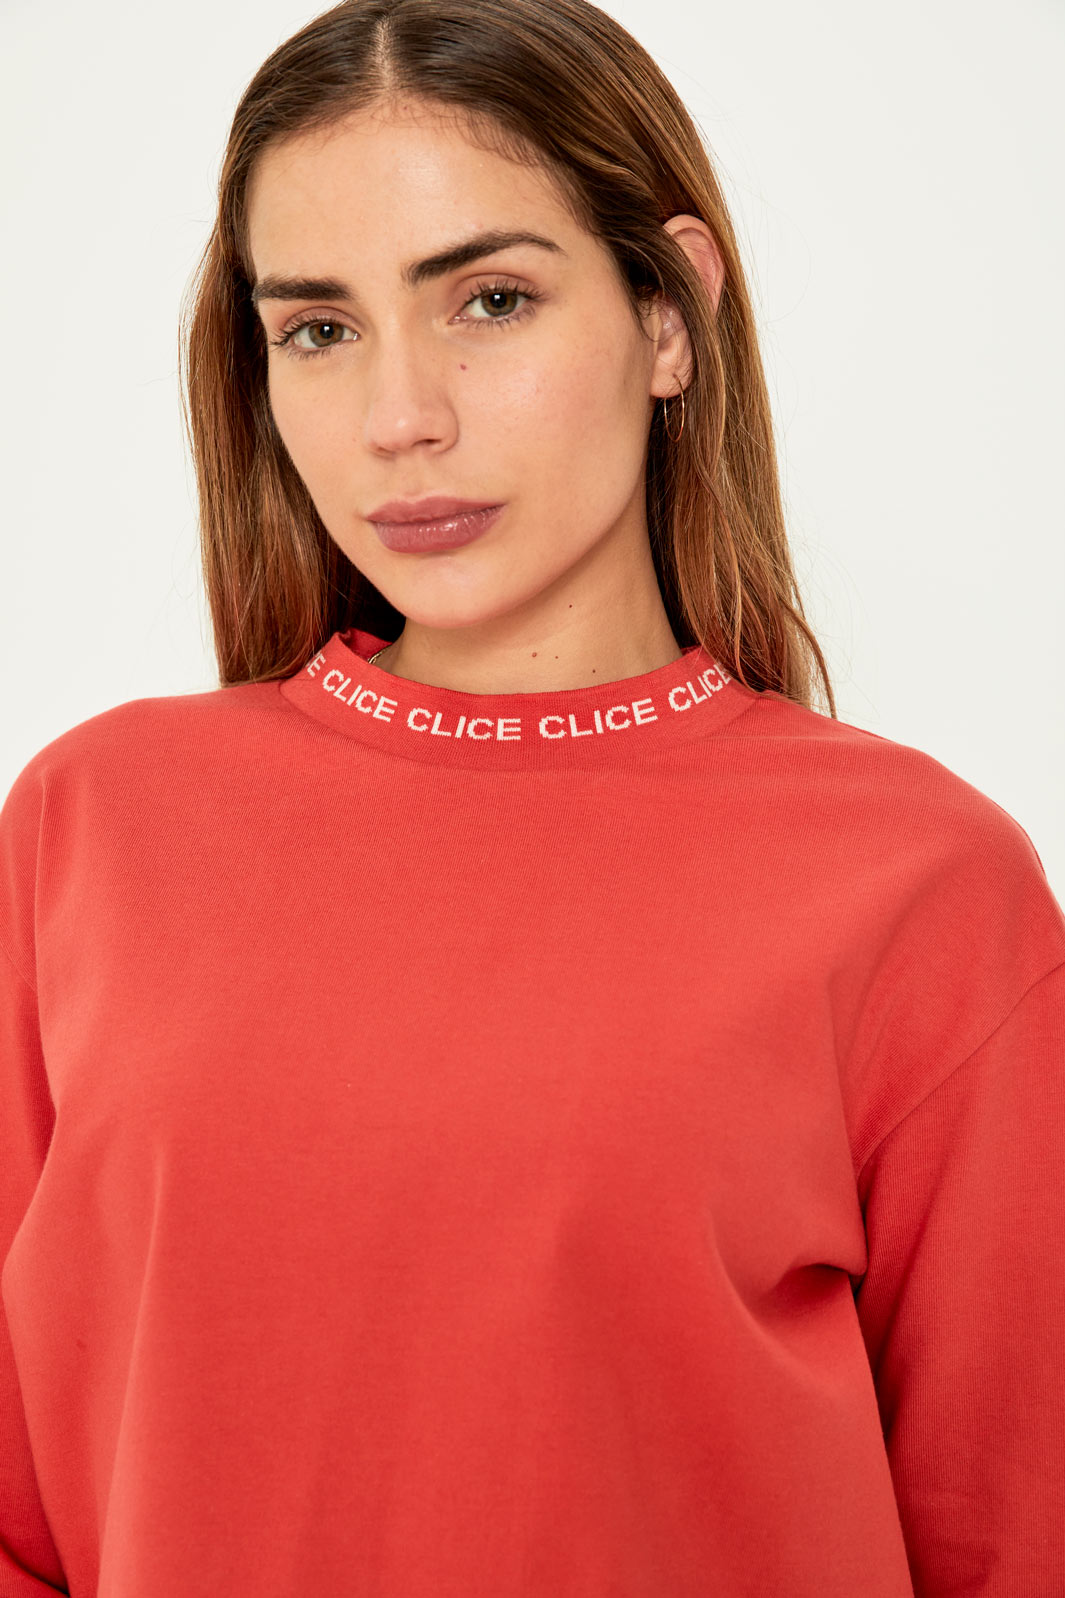 Women's collared T-shirt (Red)